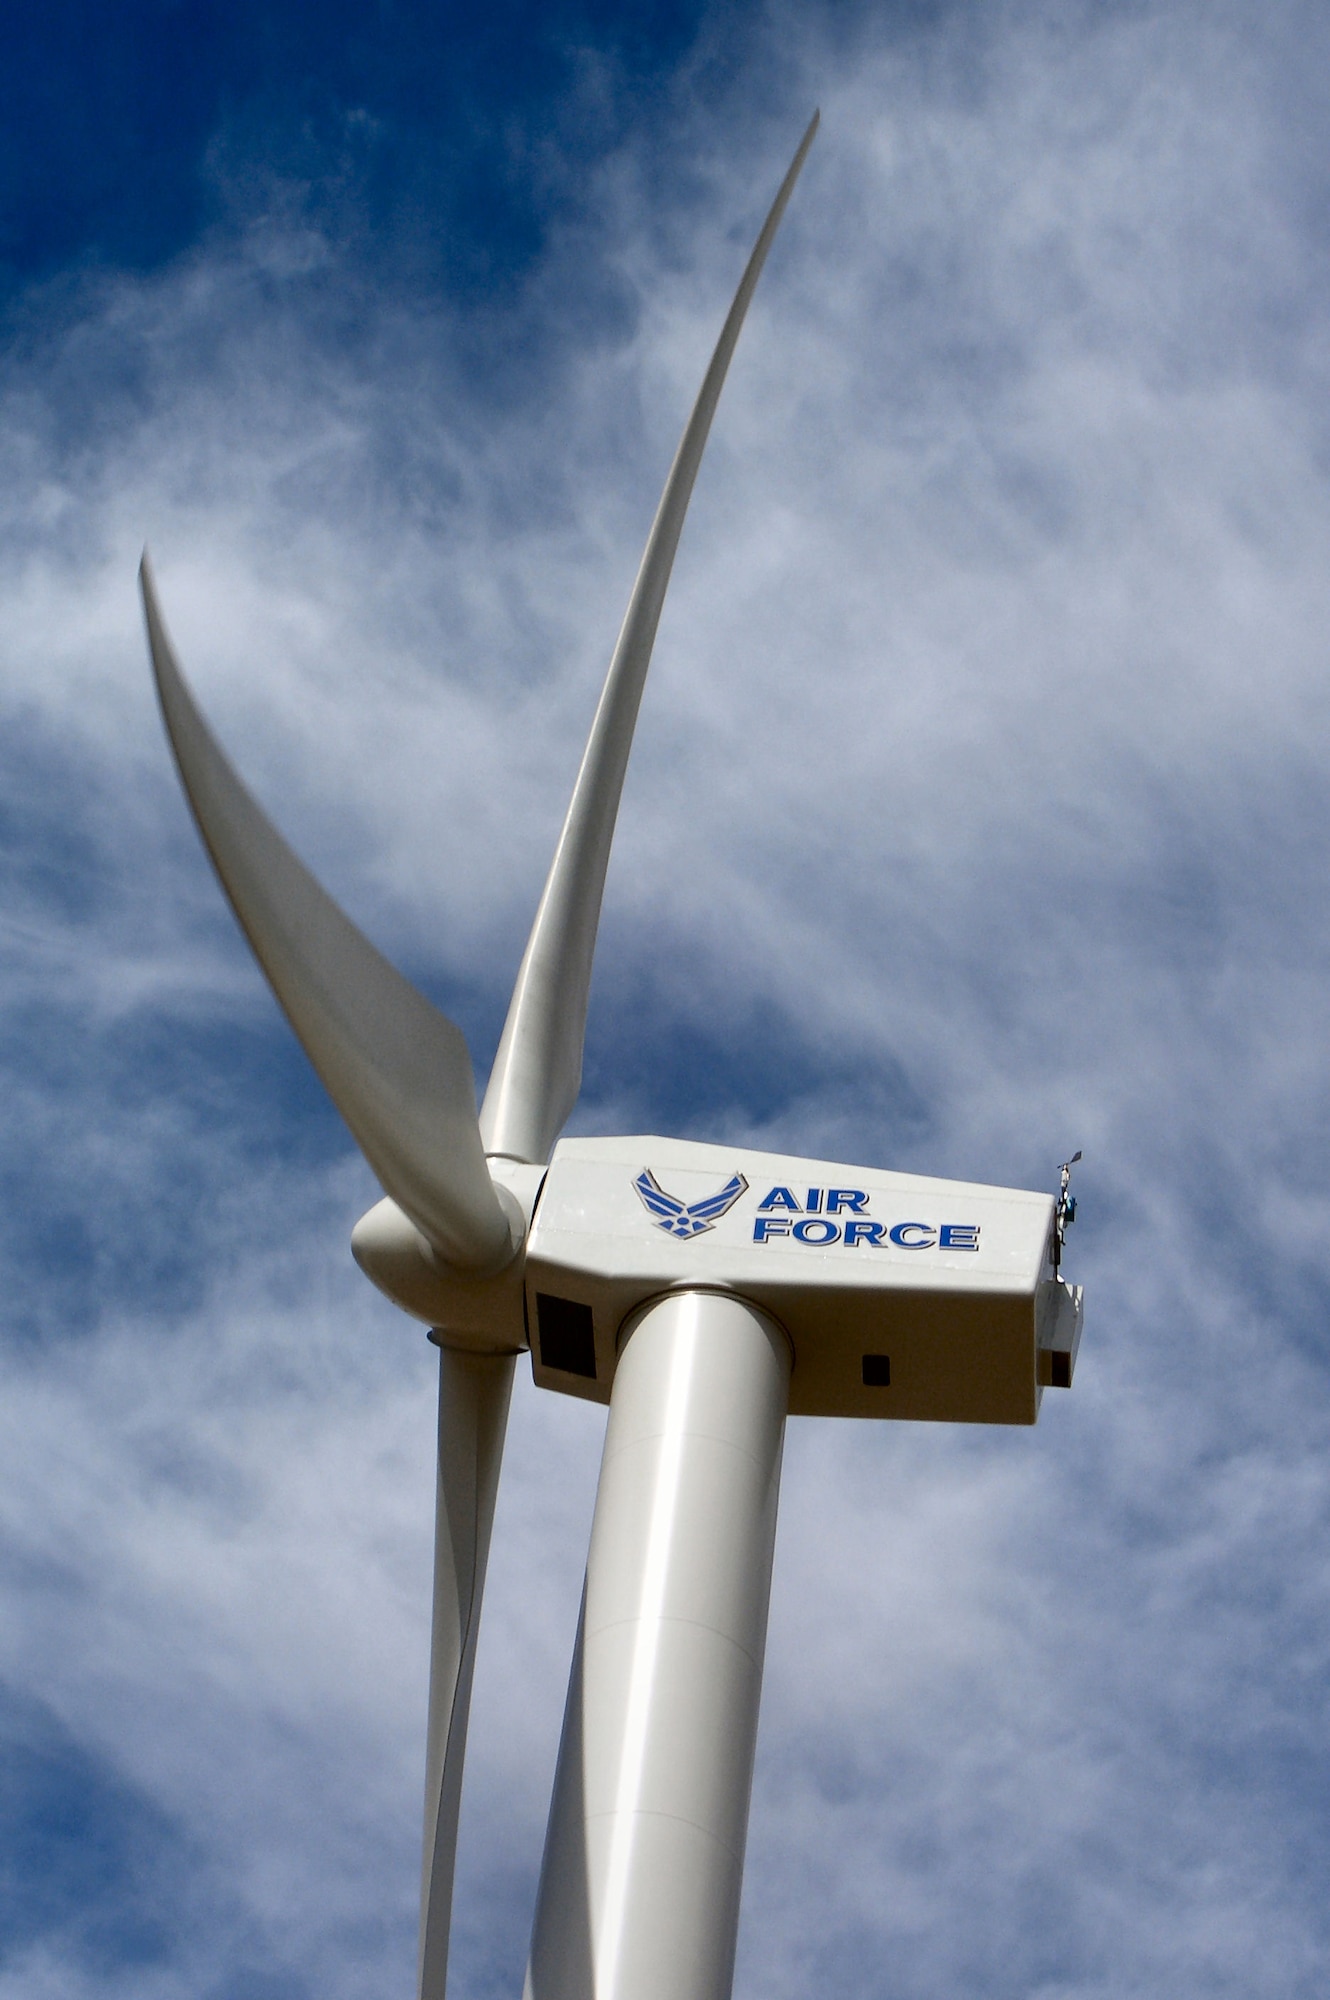 More than a dozen Energy Conservation Investment Program projects will soon break ground at Tyndall AFB and are expected to save the Air Force more than $4 million a year.  Shown in the photo is one of several wind turbines funded under the ECIP. (Courtesy photo)